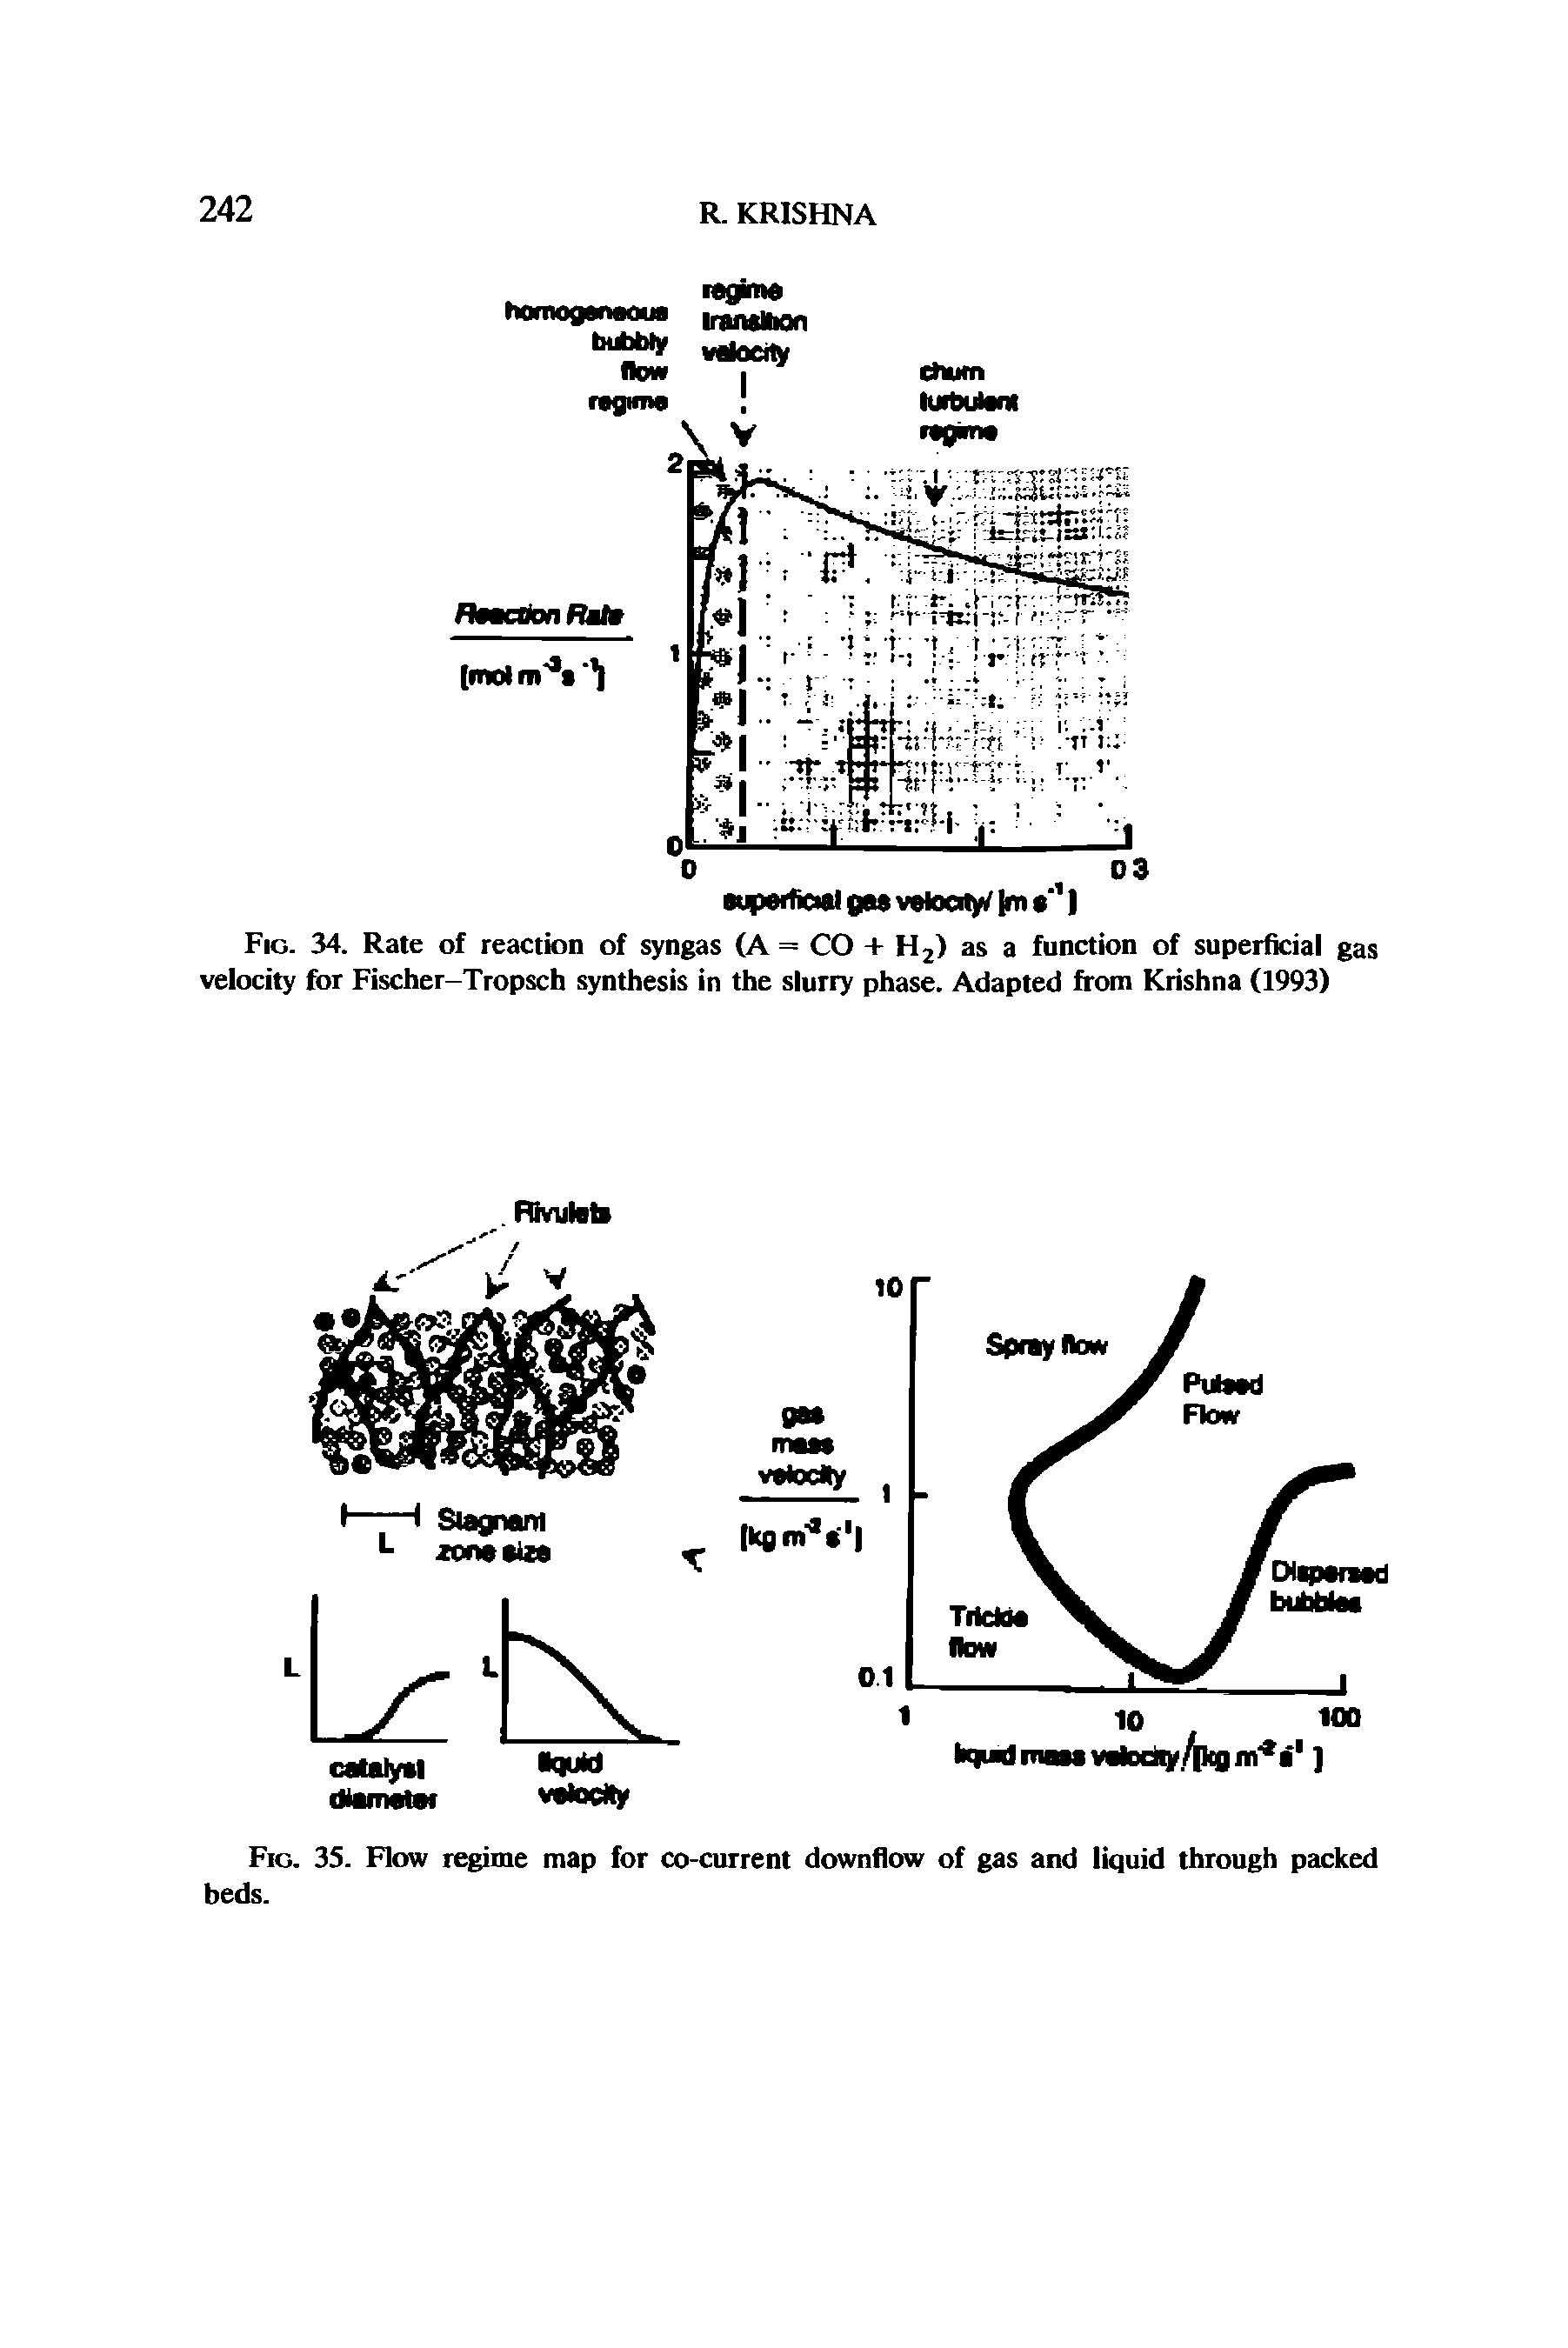 Fig. 34. Rate of reaction of syngas (A = CO + H2) as a function of superficial gas velocity for Fischer-Tropsch synthesis in the slurry phase. Adapted from Krishna (1993)...